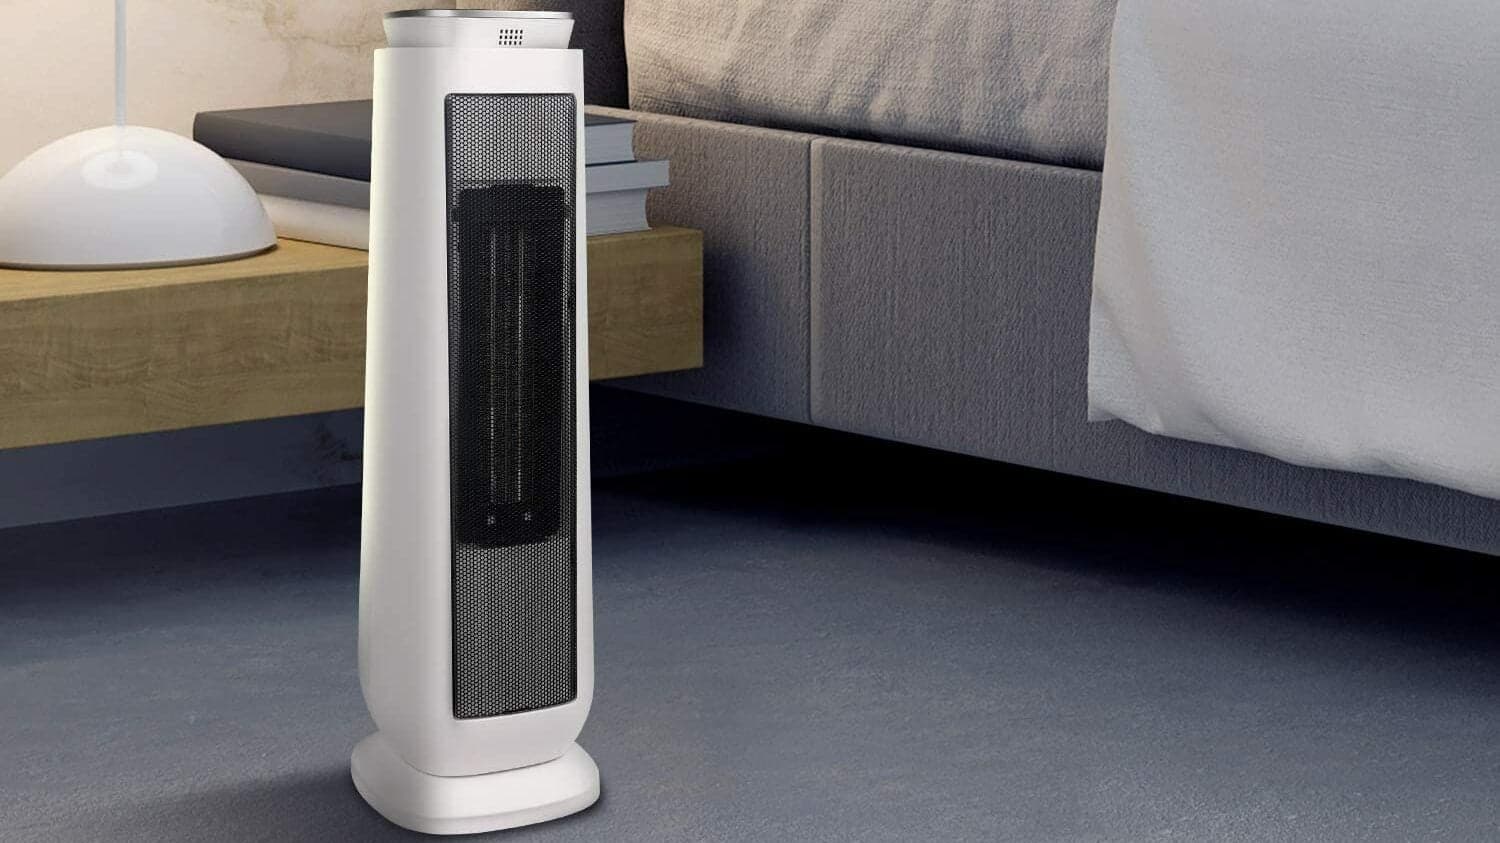 The Best Ceramic Heaters (Review & Buying Guide) in 2022